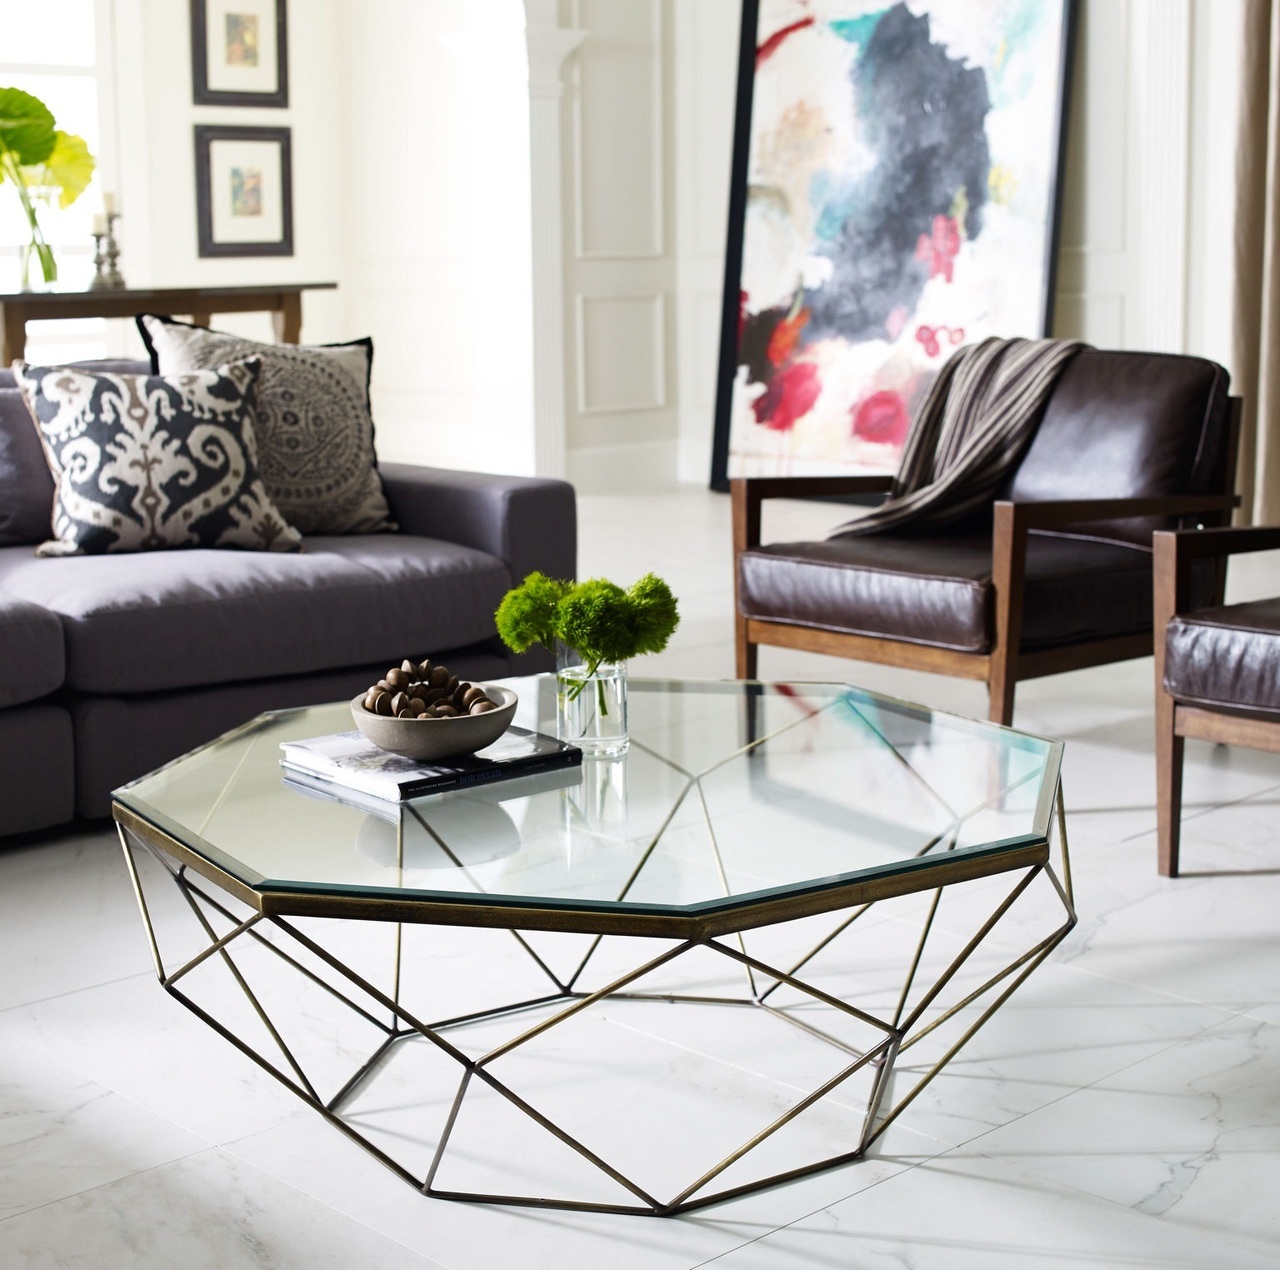 A geometric glass coffee table adds dynamic and transparency to the room